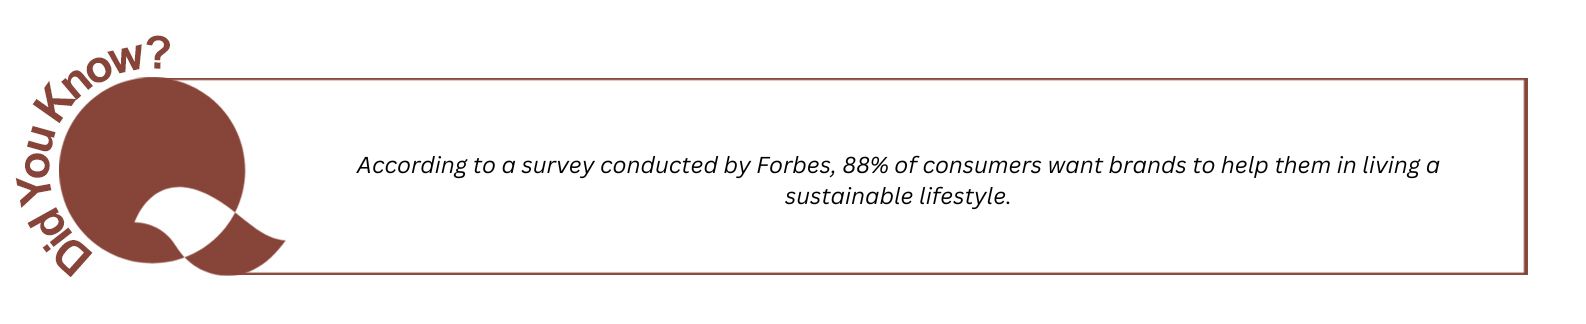 According to a survey conducted by Forbes, 88% of consumers want brands to help live them a sustainable lifestyle